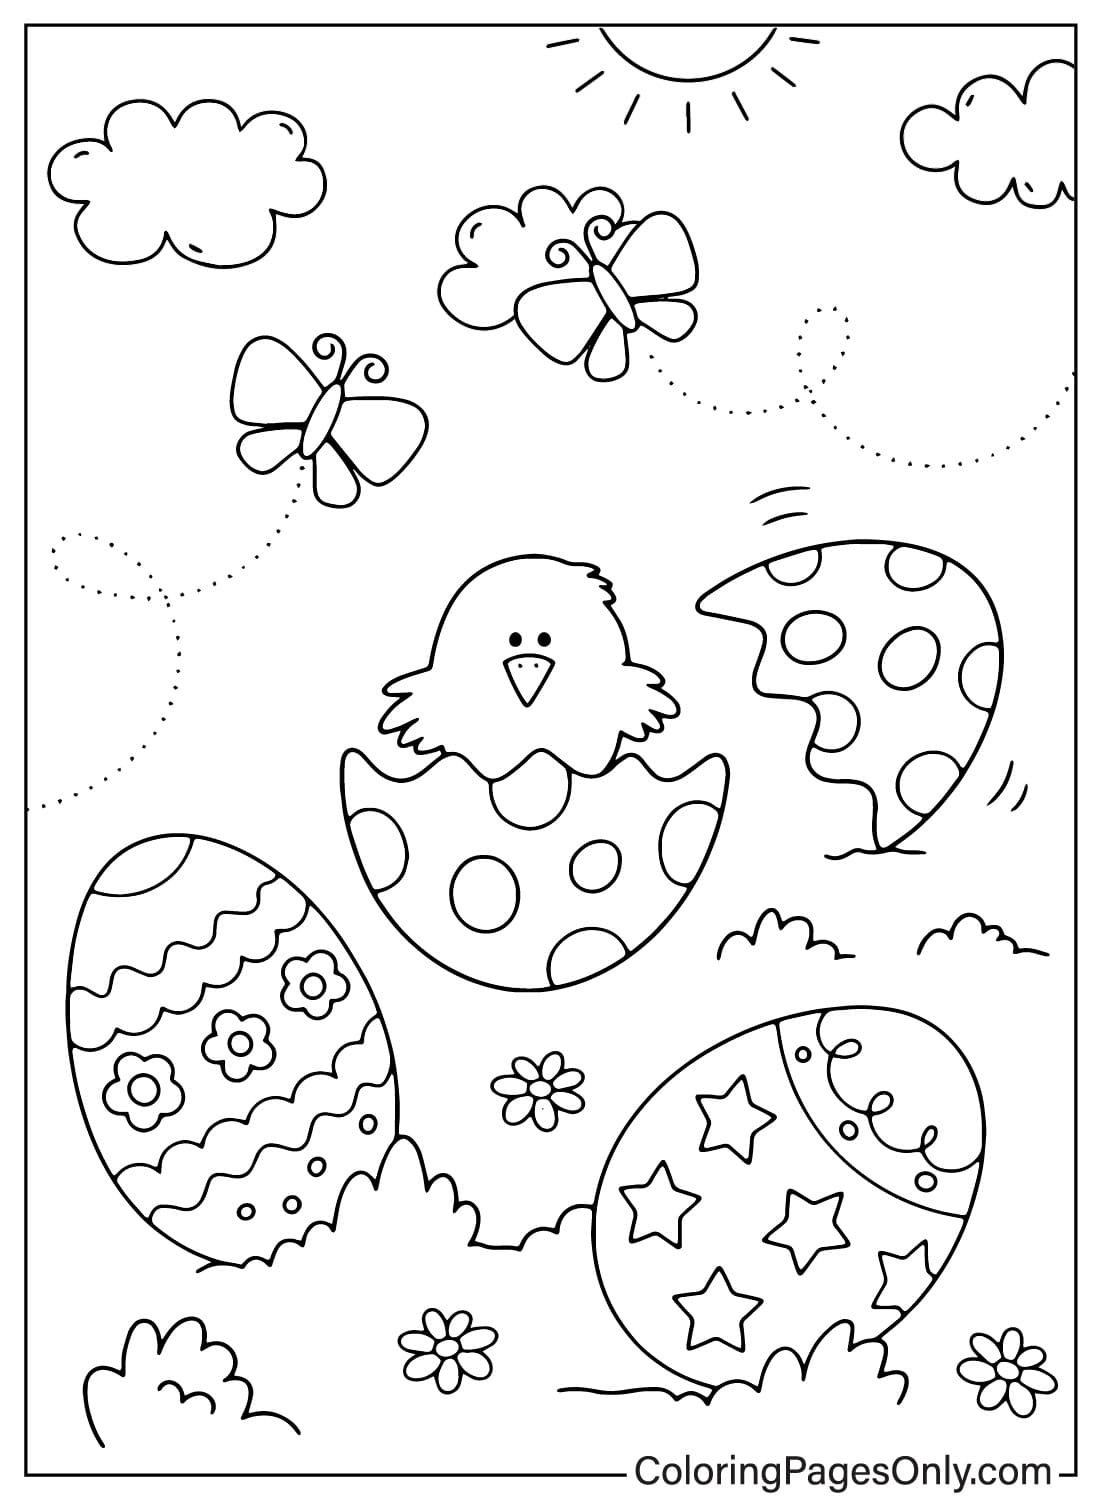 Printable Easter Eggs and Chick Coloring Page